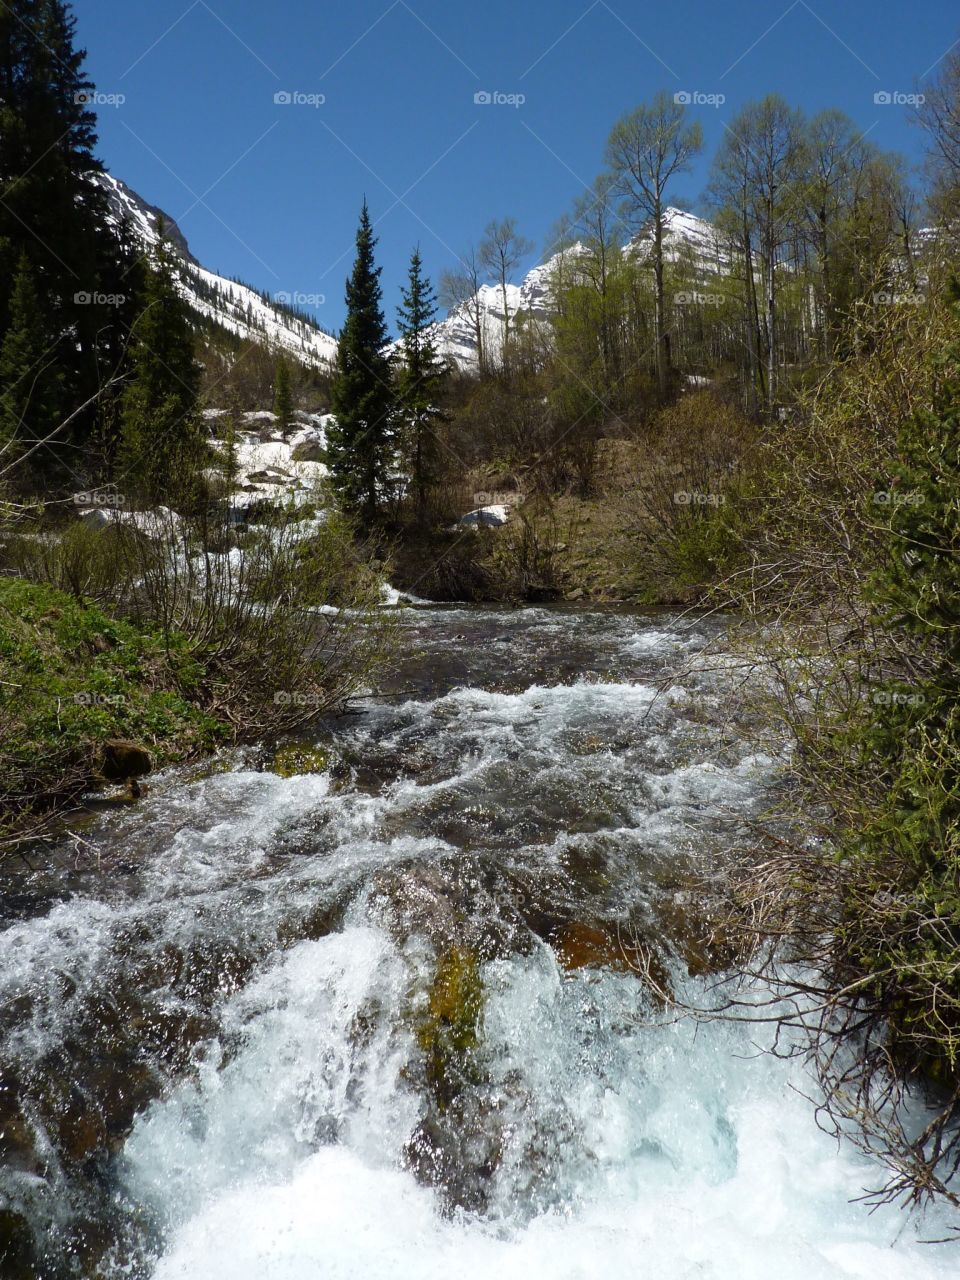 babbling Brook in Colorado's mountains